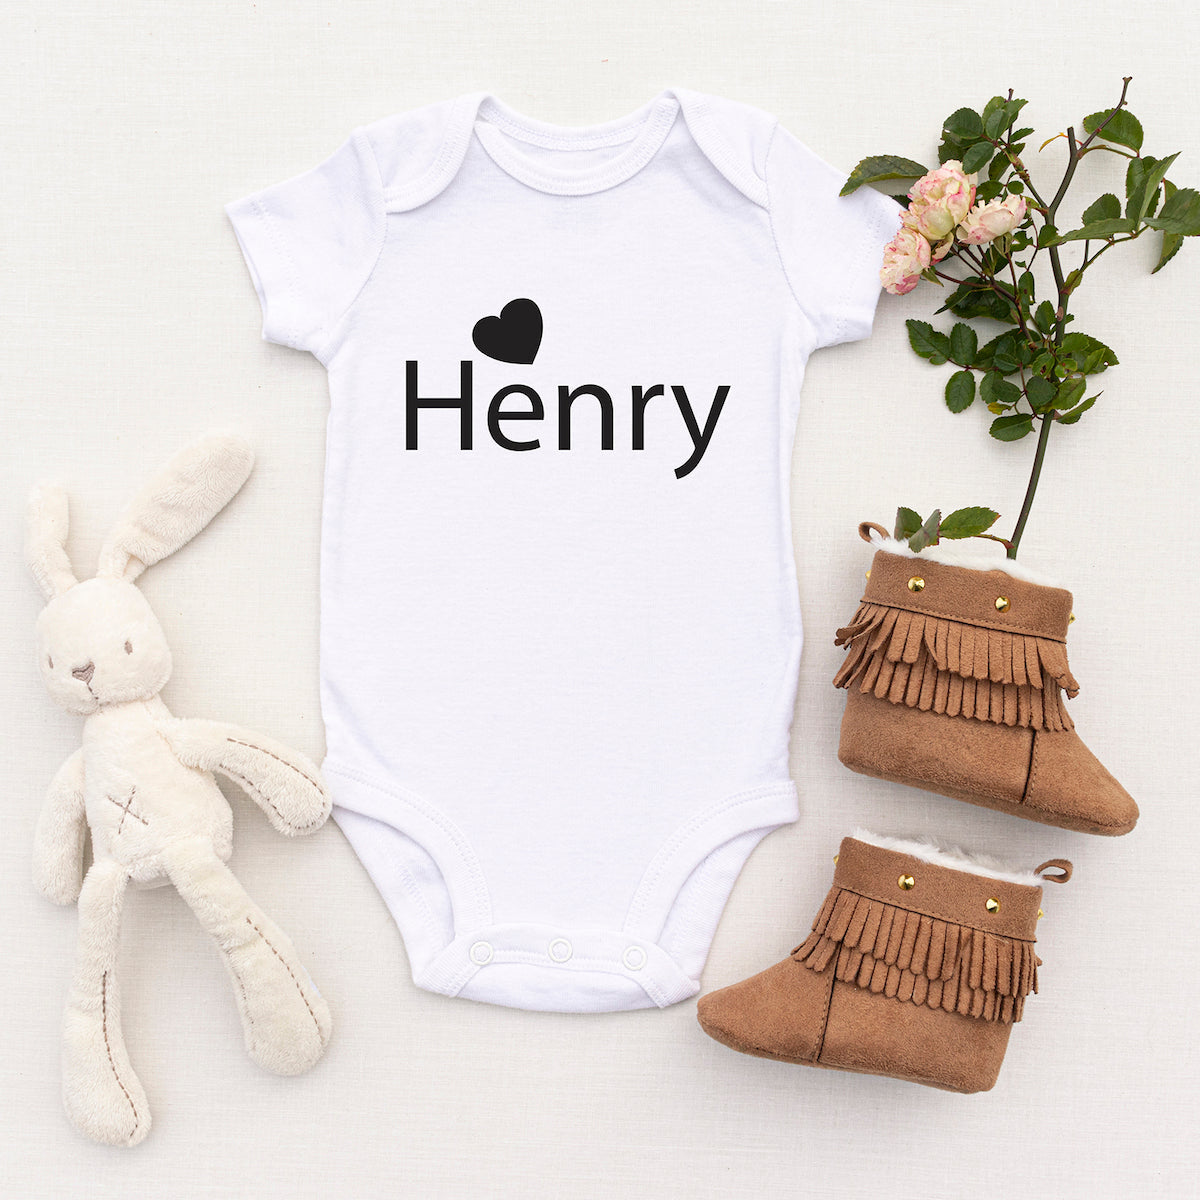 Personalised White Baby Body Suit Grow Vest - Love Heart!